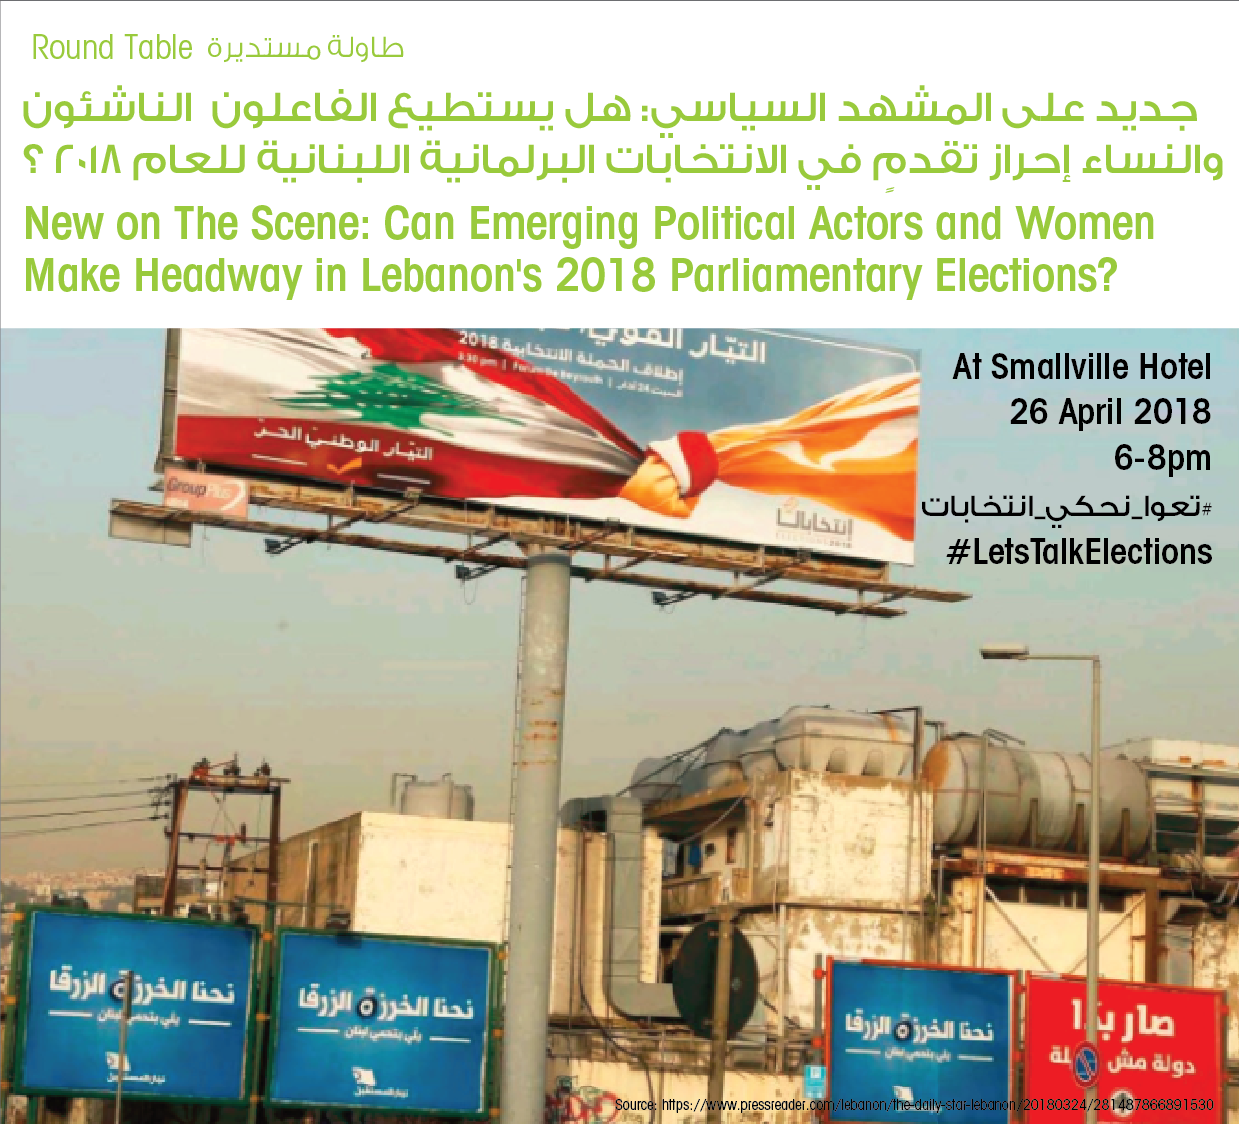 Can Emerging Political Actors and Women make Headway in Lebanon’s 2018 Parliamentary Elections?